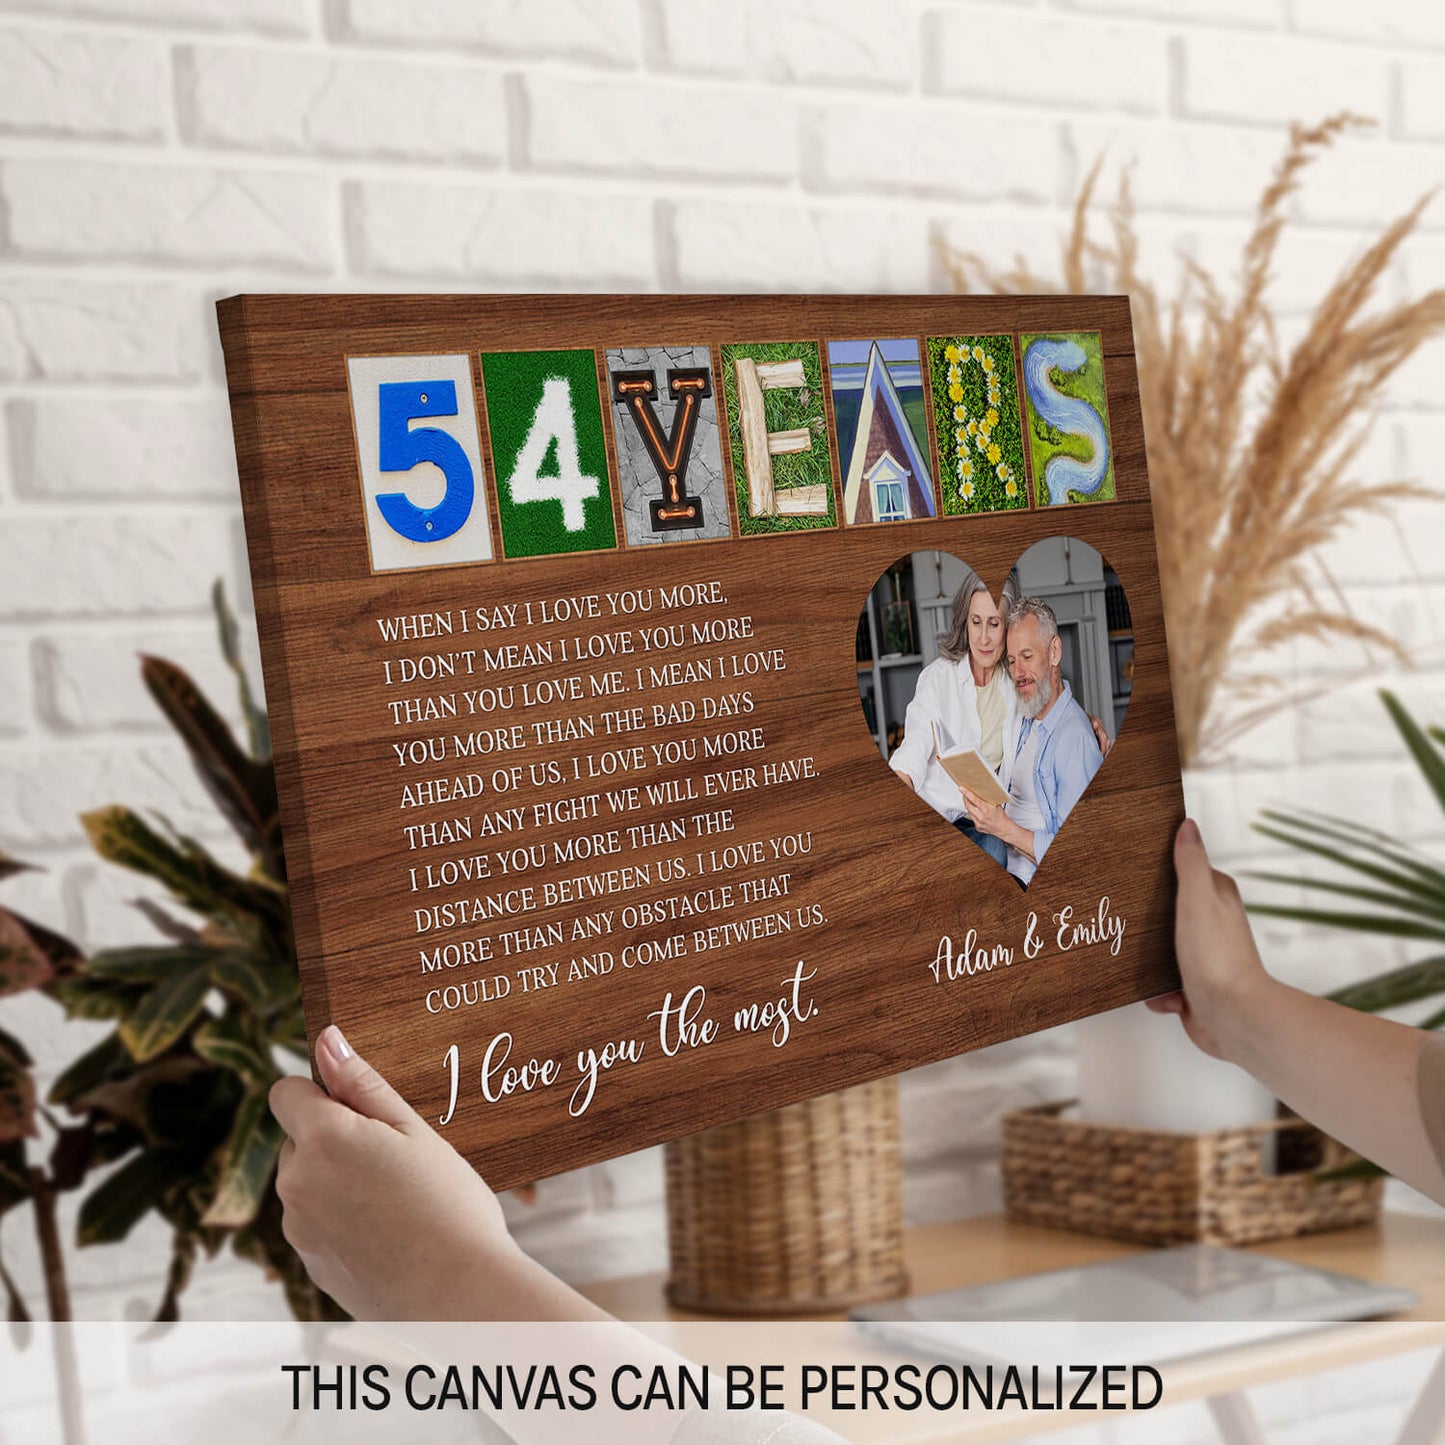 54 Years - Personalized 54 Year Anniversary gift For Husband or Wife - Custom Canvas Print - MyMindfulGifts